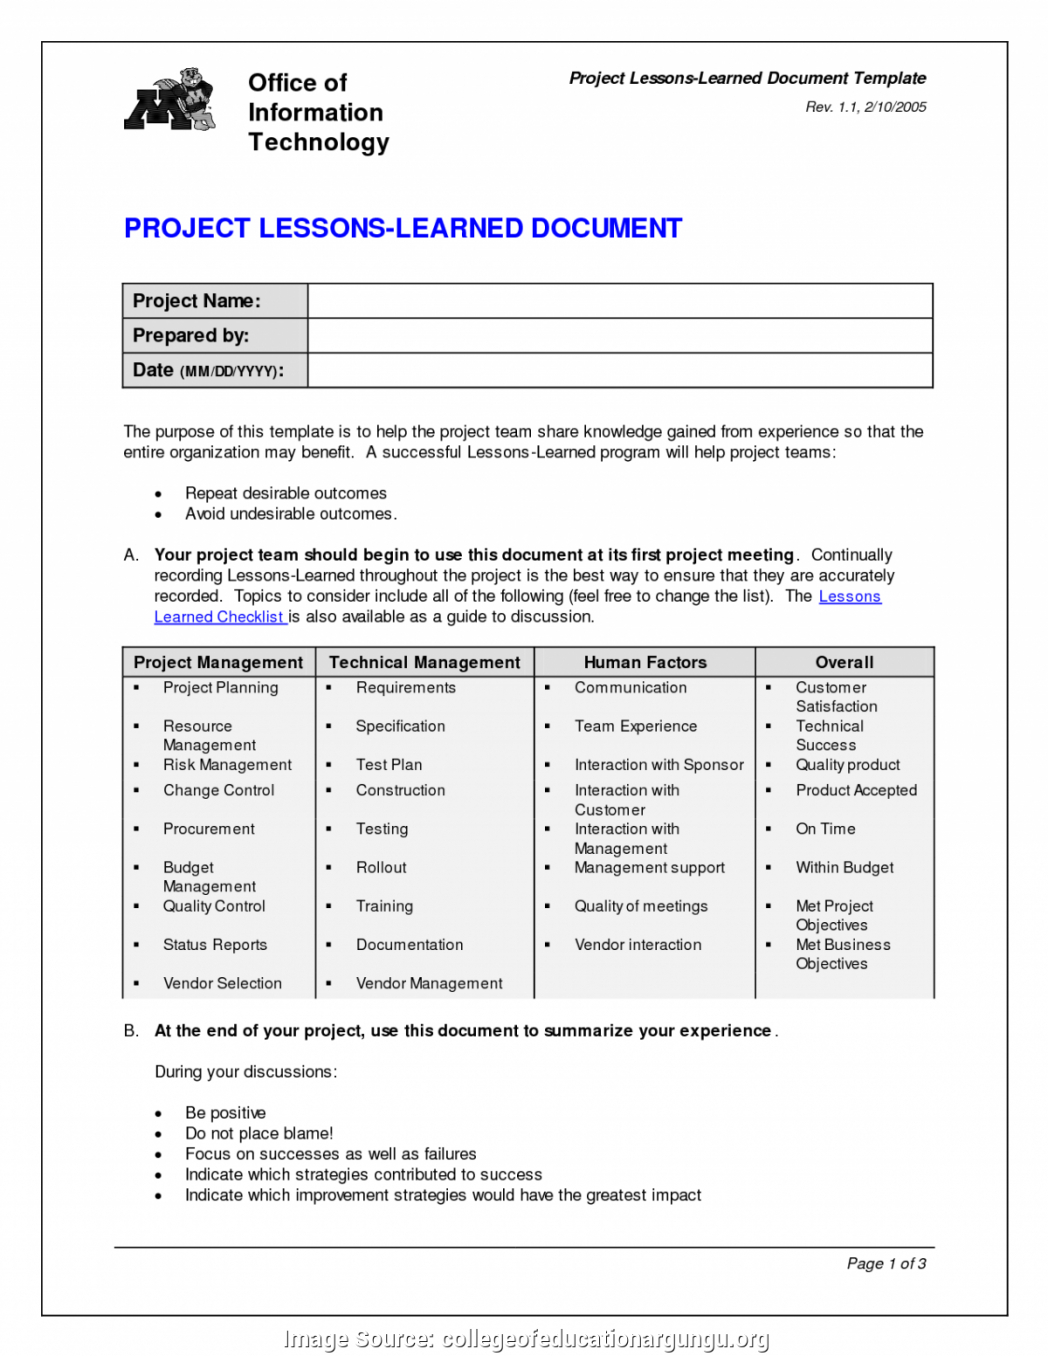 Project Management Final Report Template – Atlantaauctionco Intended For Project Management Final Report Template